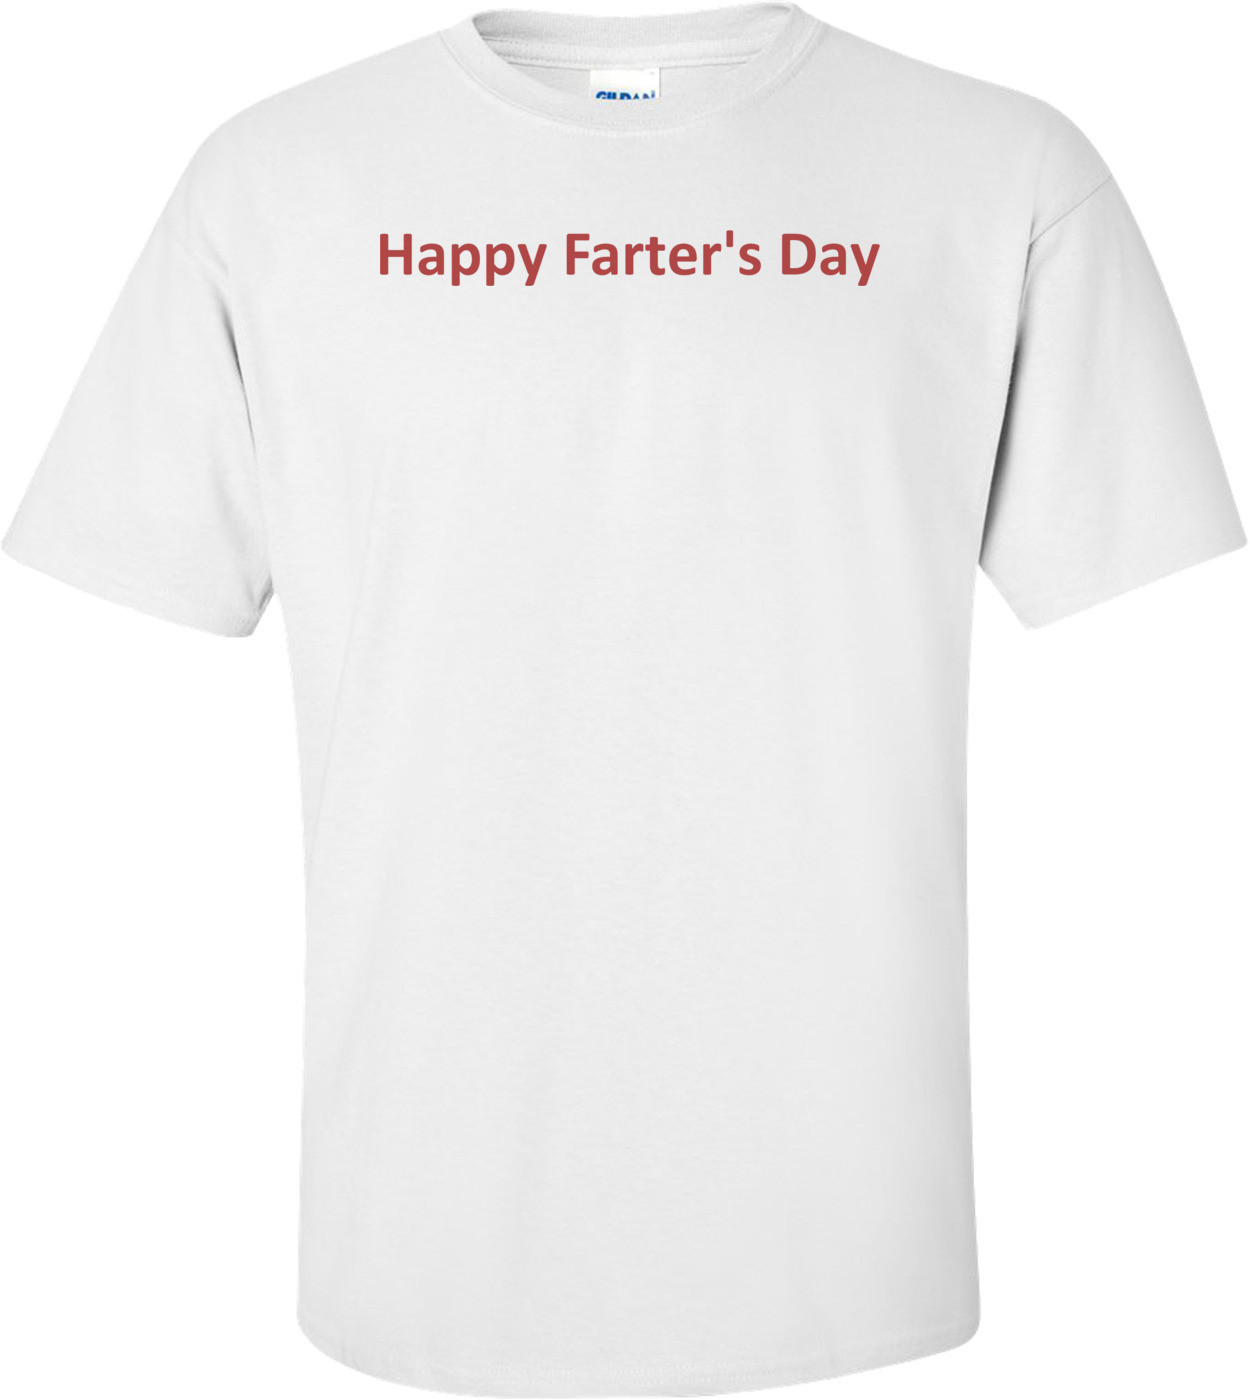 Happy Farter's Day